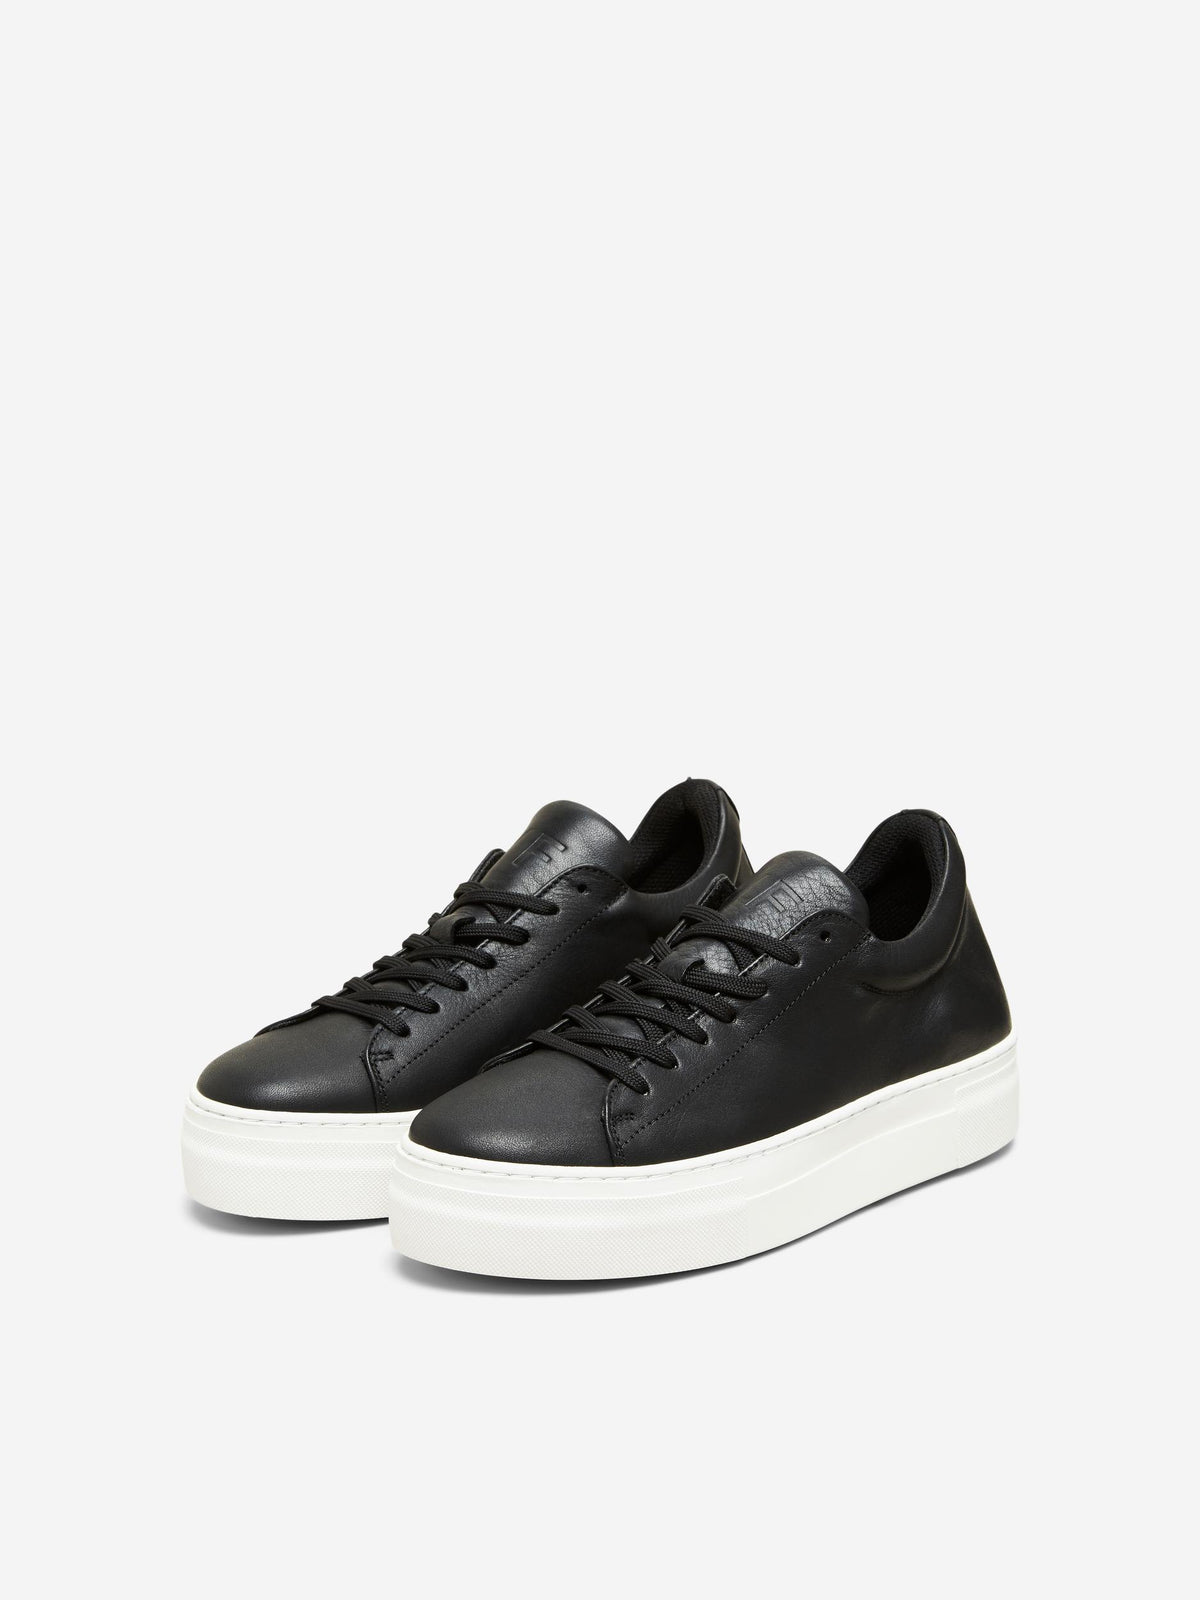 SLF Hailey Leather Trainer in Black